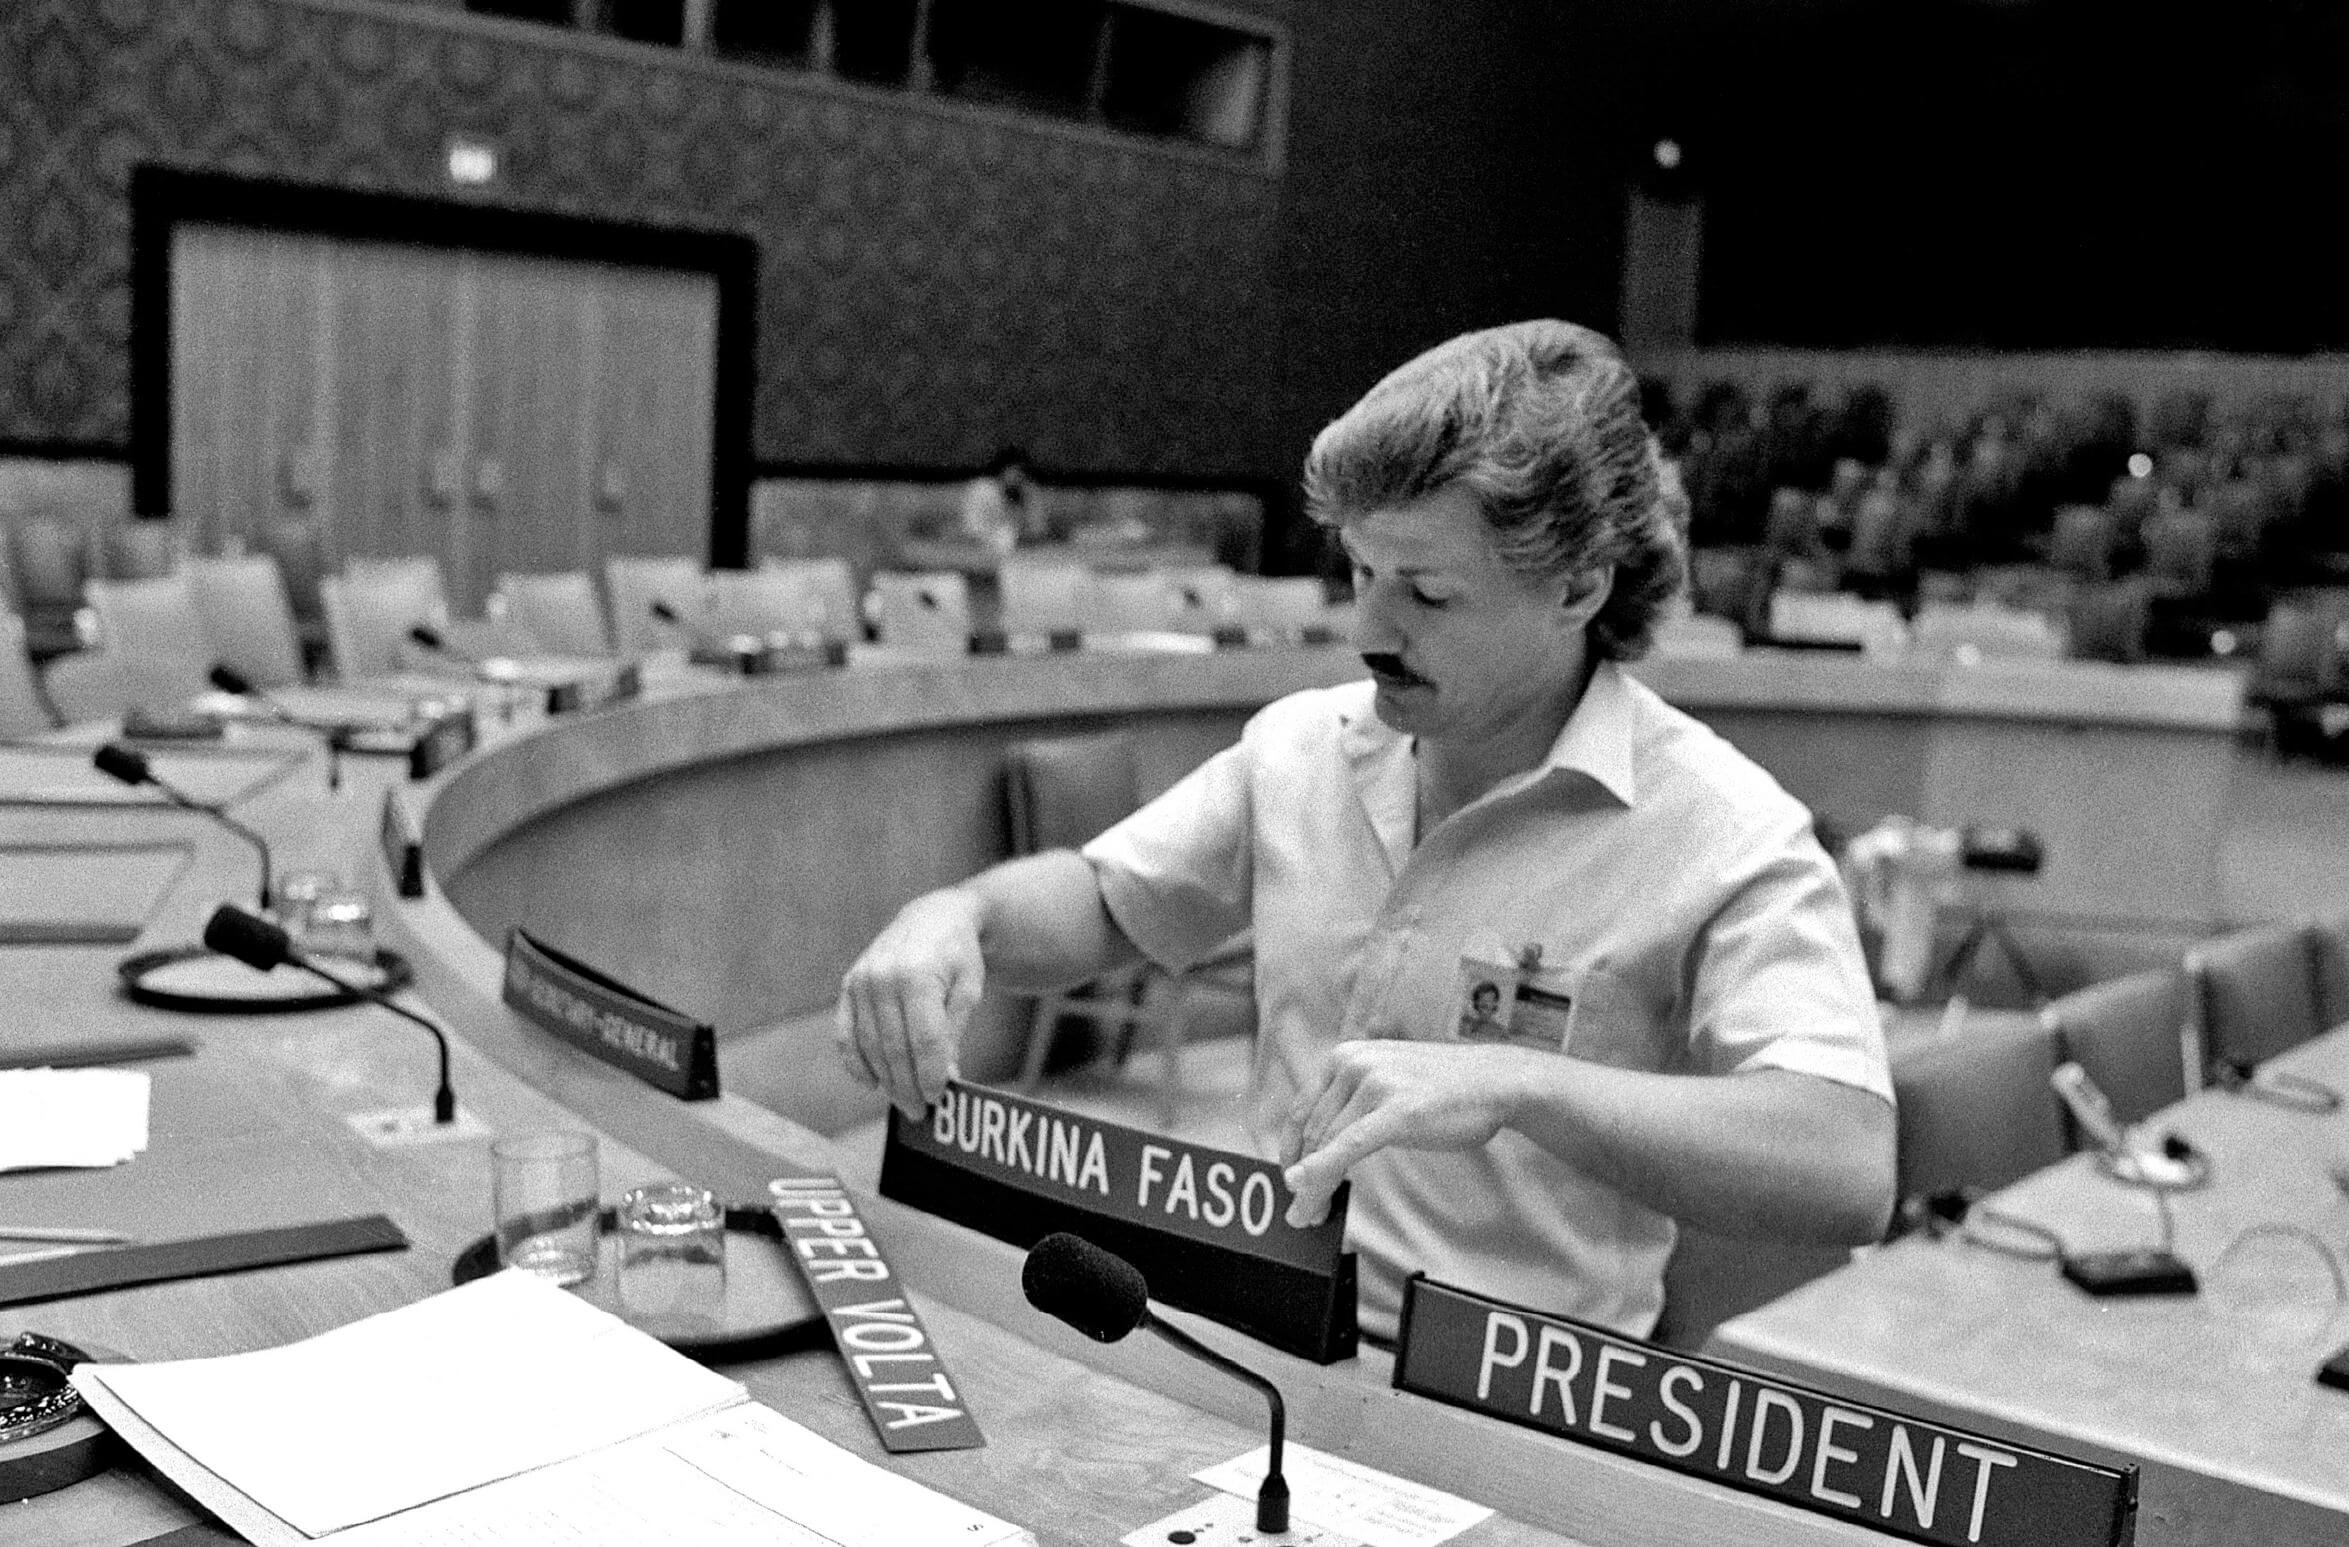 The name of Upper Volta is changed to Burkina Faso in the UN Security Council, 1984. © United Nations Photo / Flickr